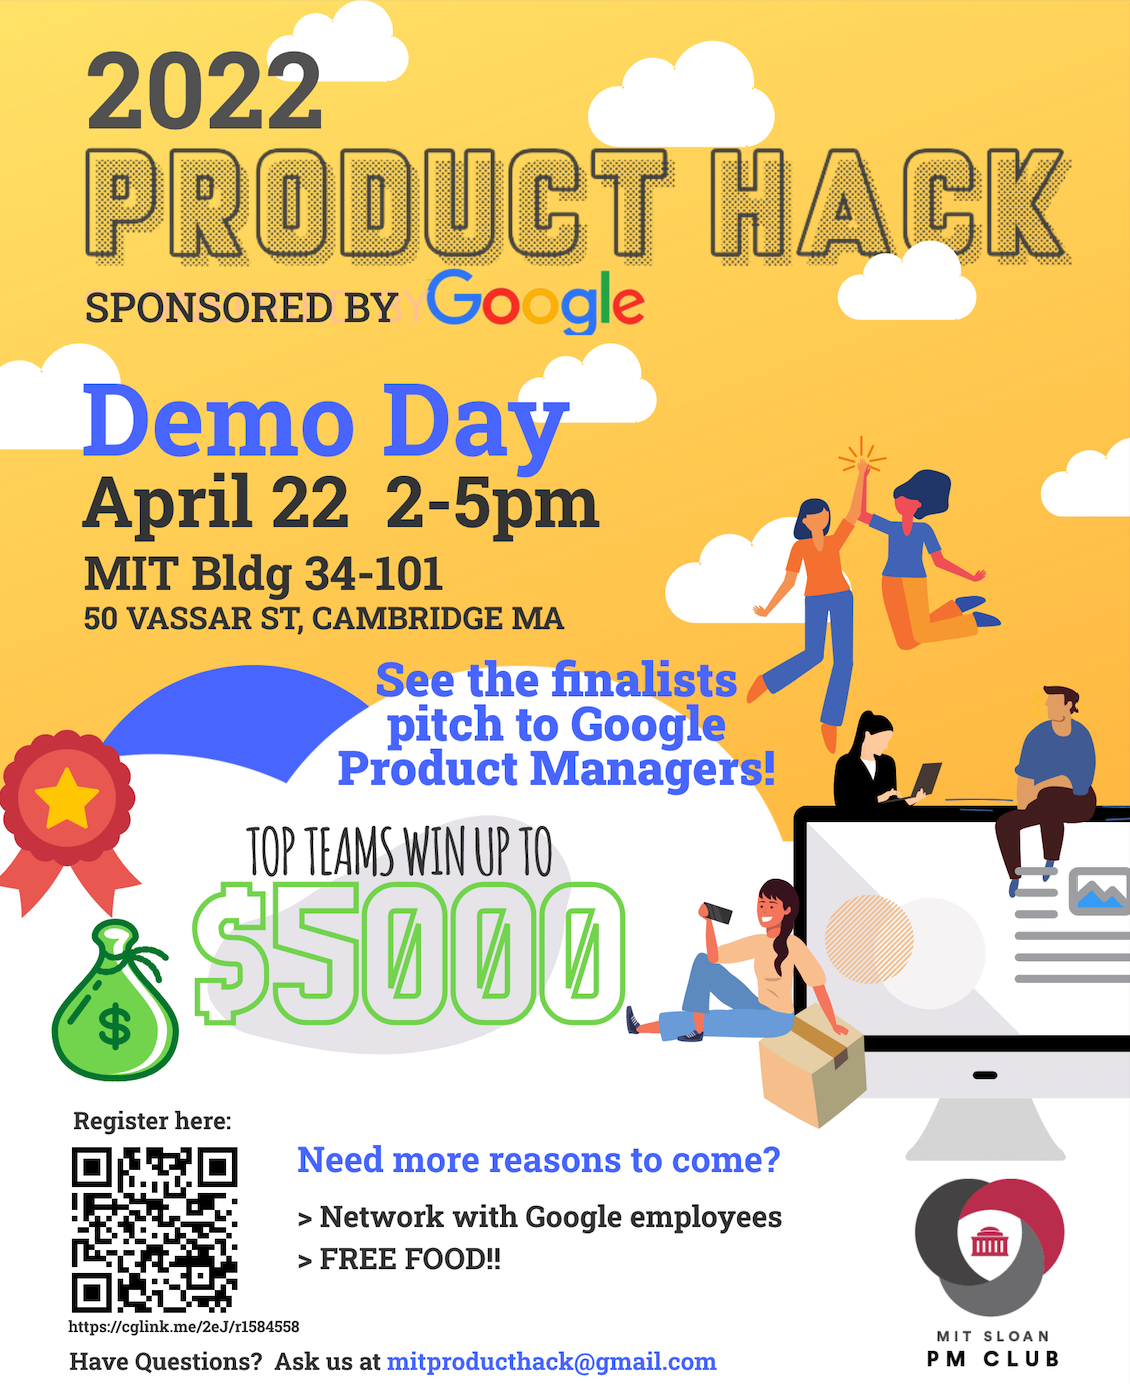 MIT Sloan Product Management Club: 2022 Product Hack Sponsored by  Google—DEMO DAY - MIT Office of Innovation